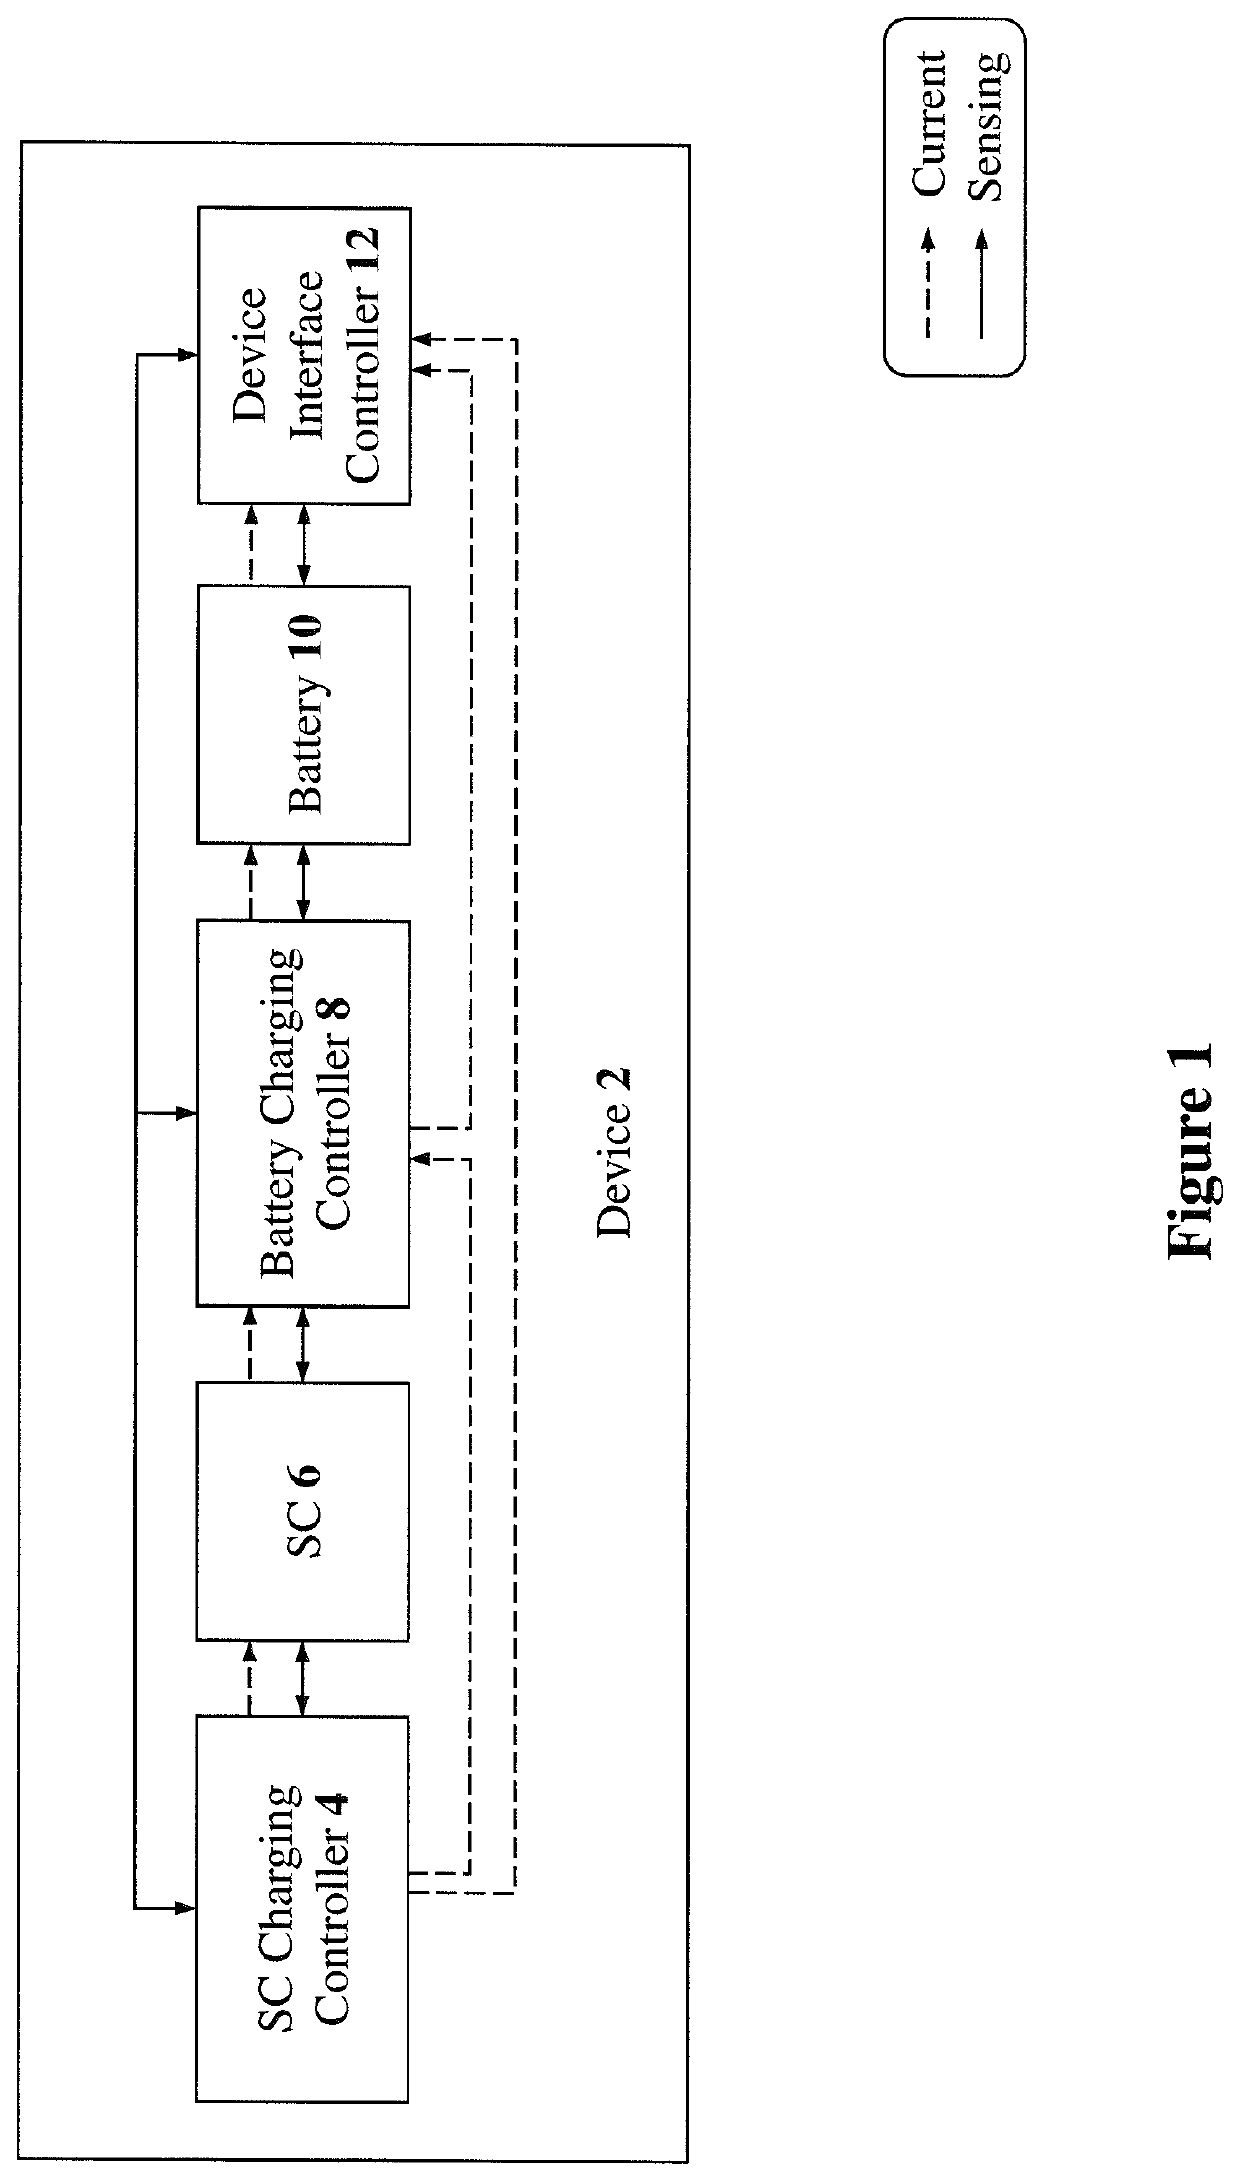 Systems and methods for adaptive fast-charging for mobile devices and devices having sporadic power-source connection